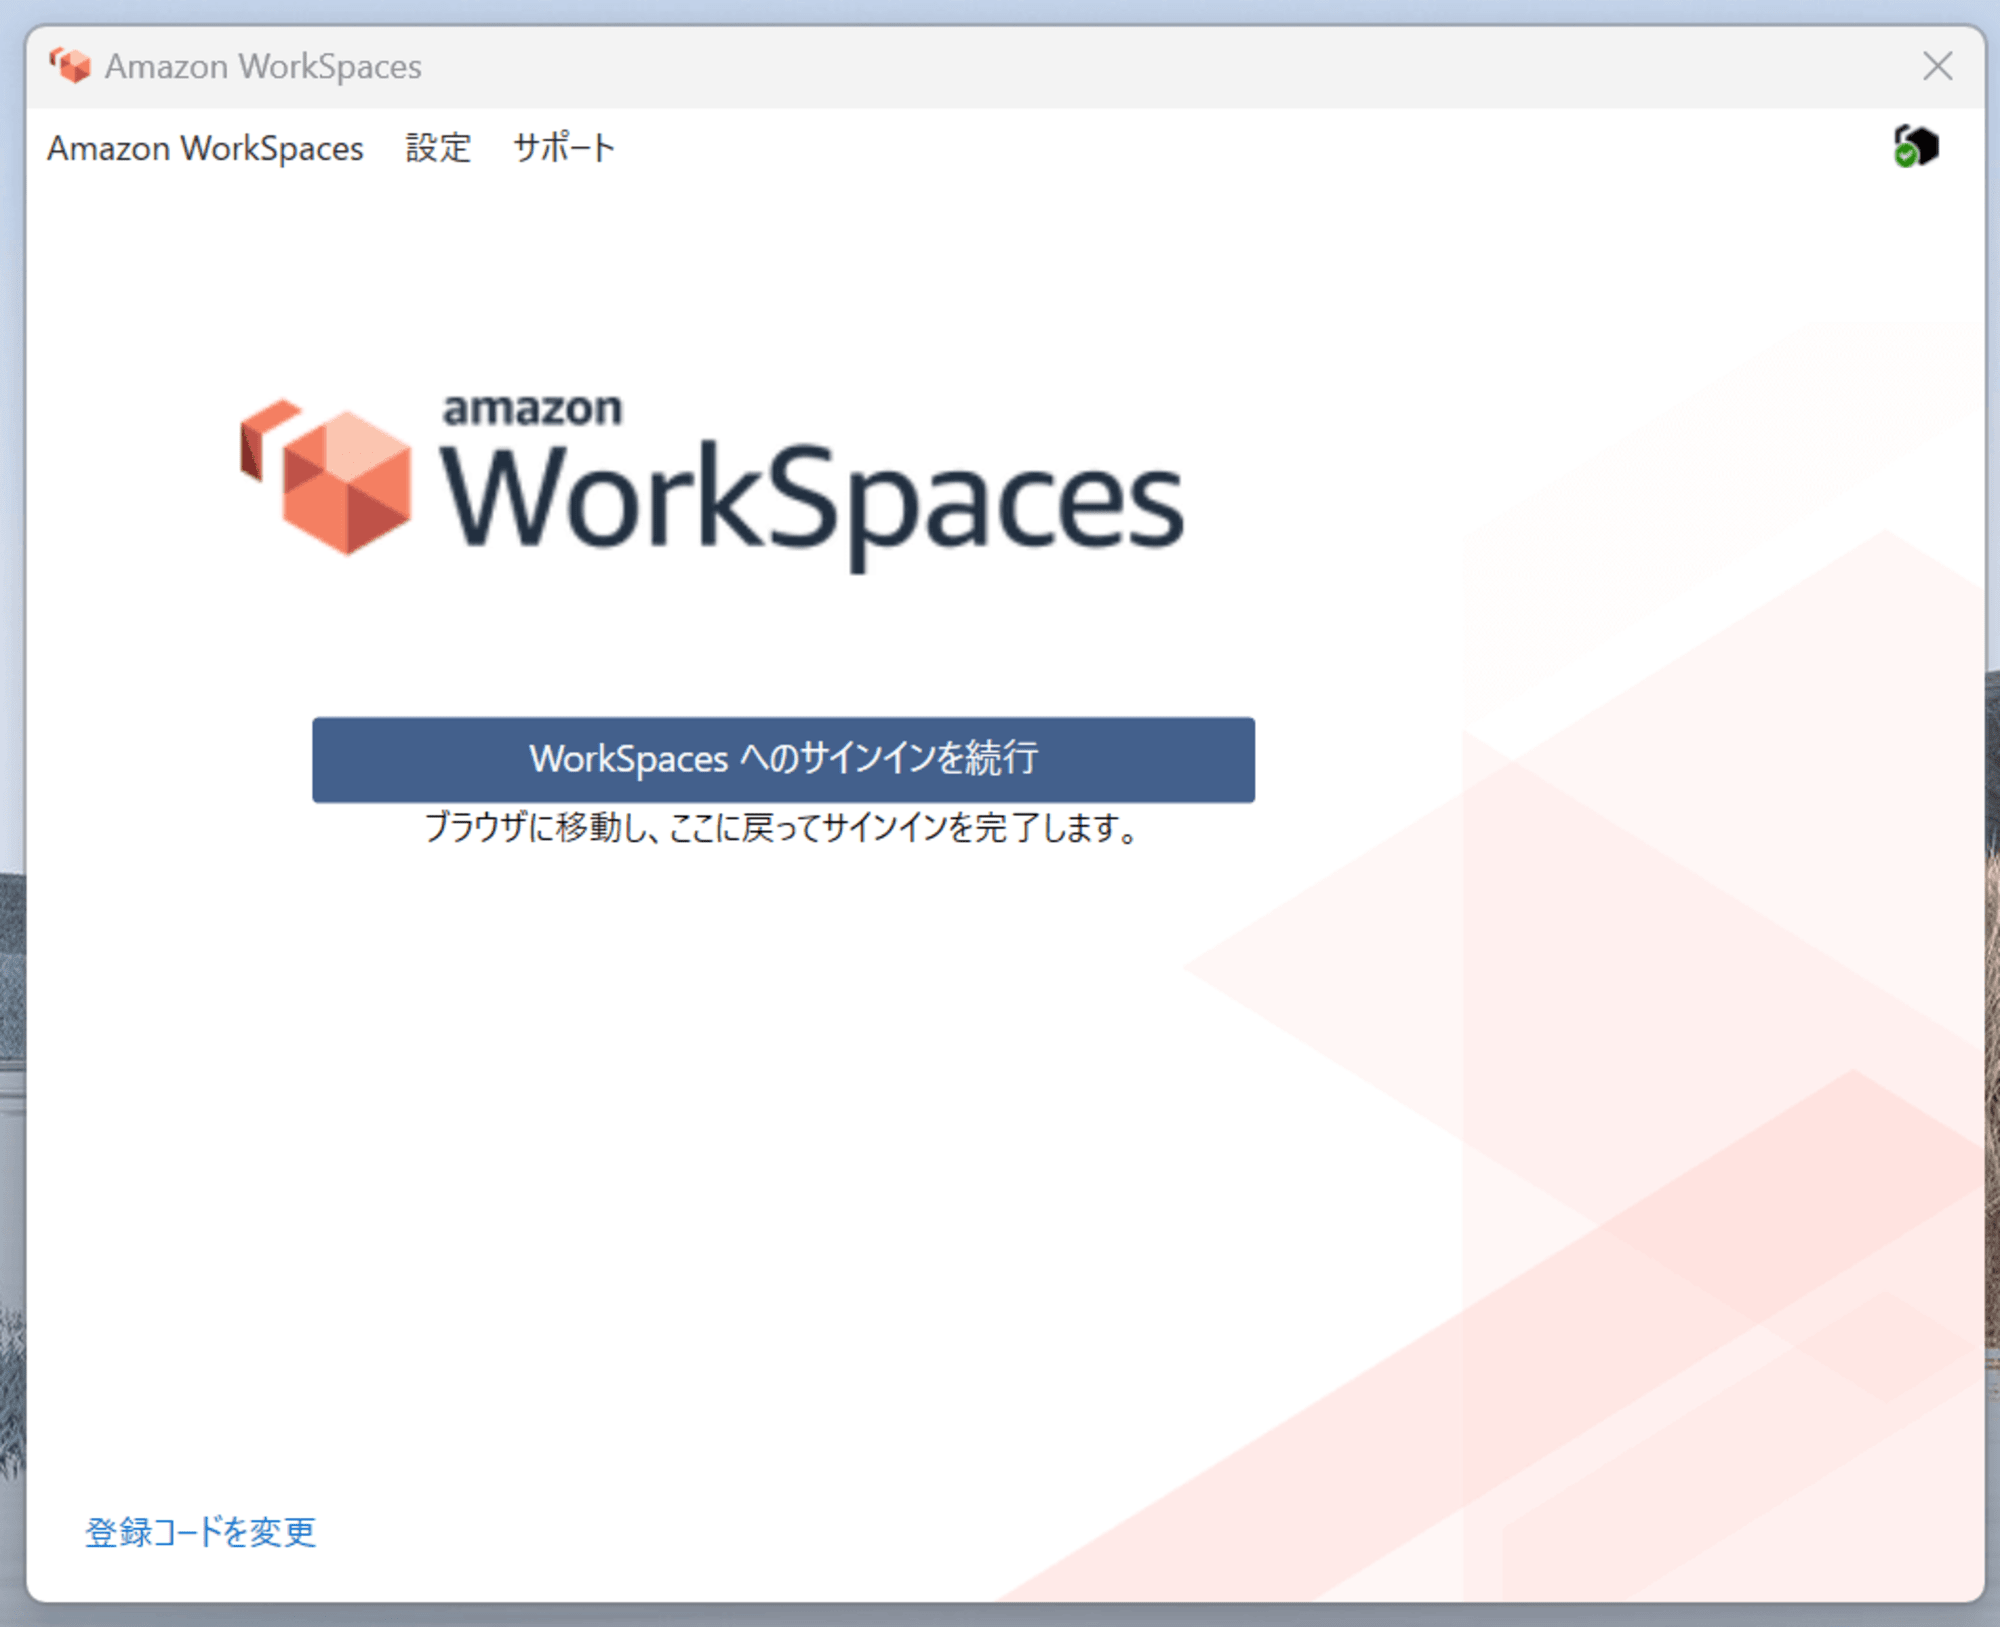 amazon-workspaces-supports-workspaces-pools-05